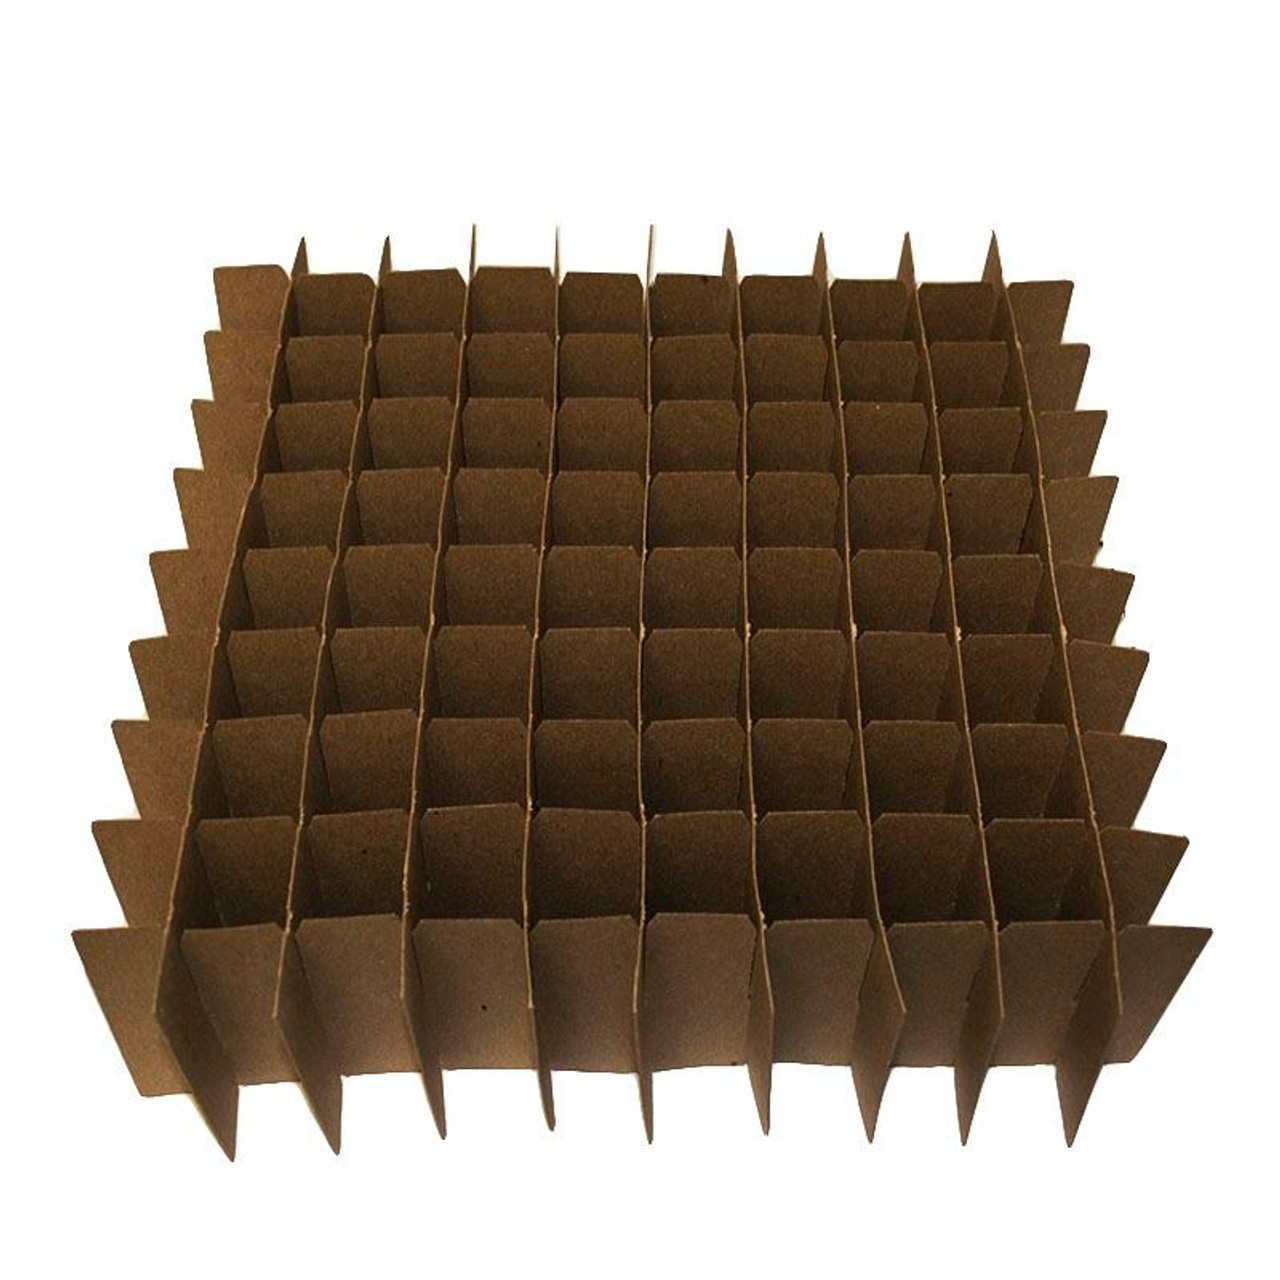 Square Cell Dividers — Custom Cardboard Box Partitions